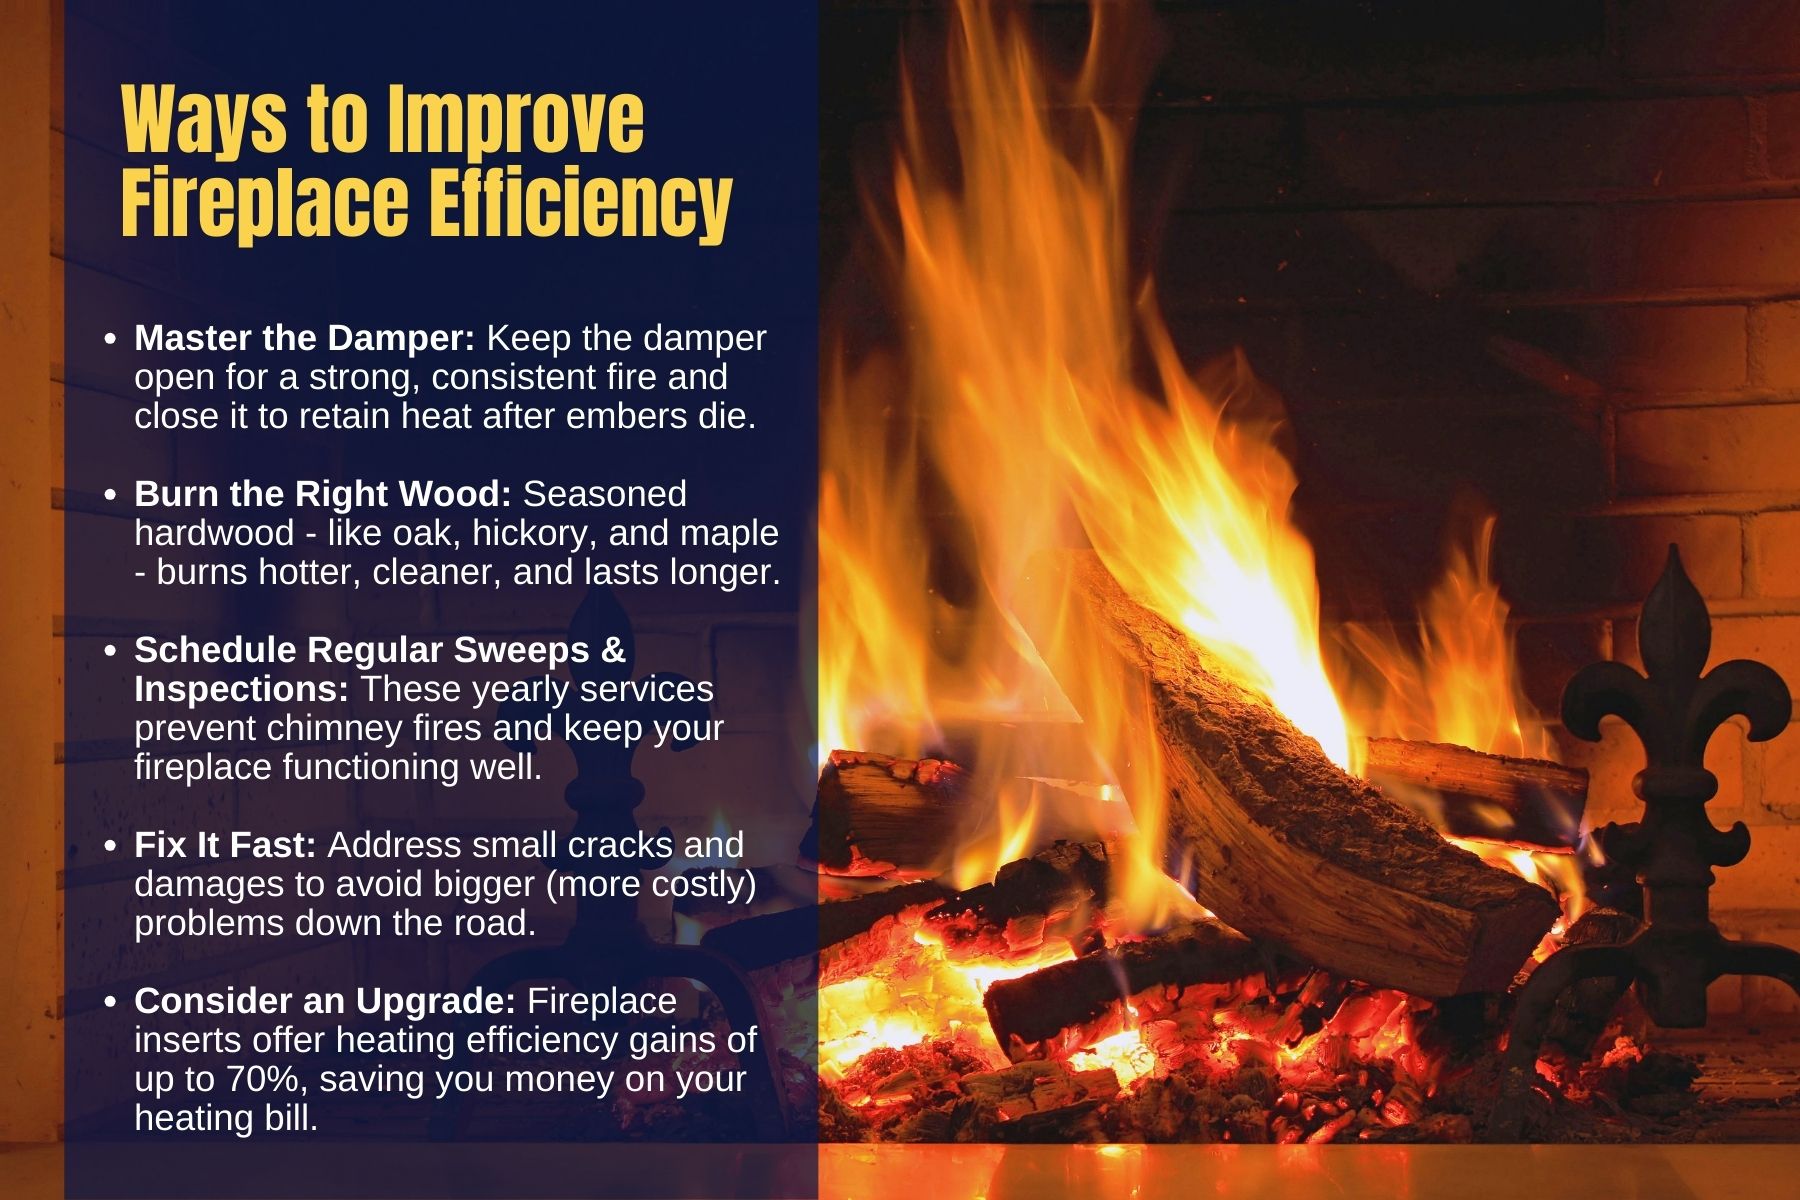 original infographic stating 5 ways to improve fireplace efficiency